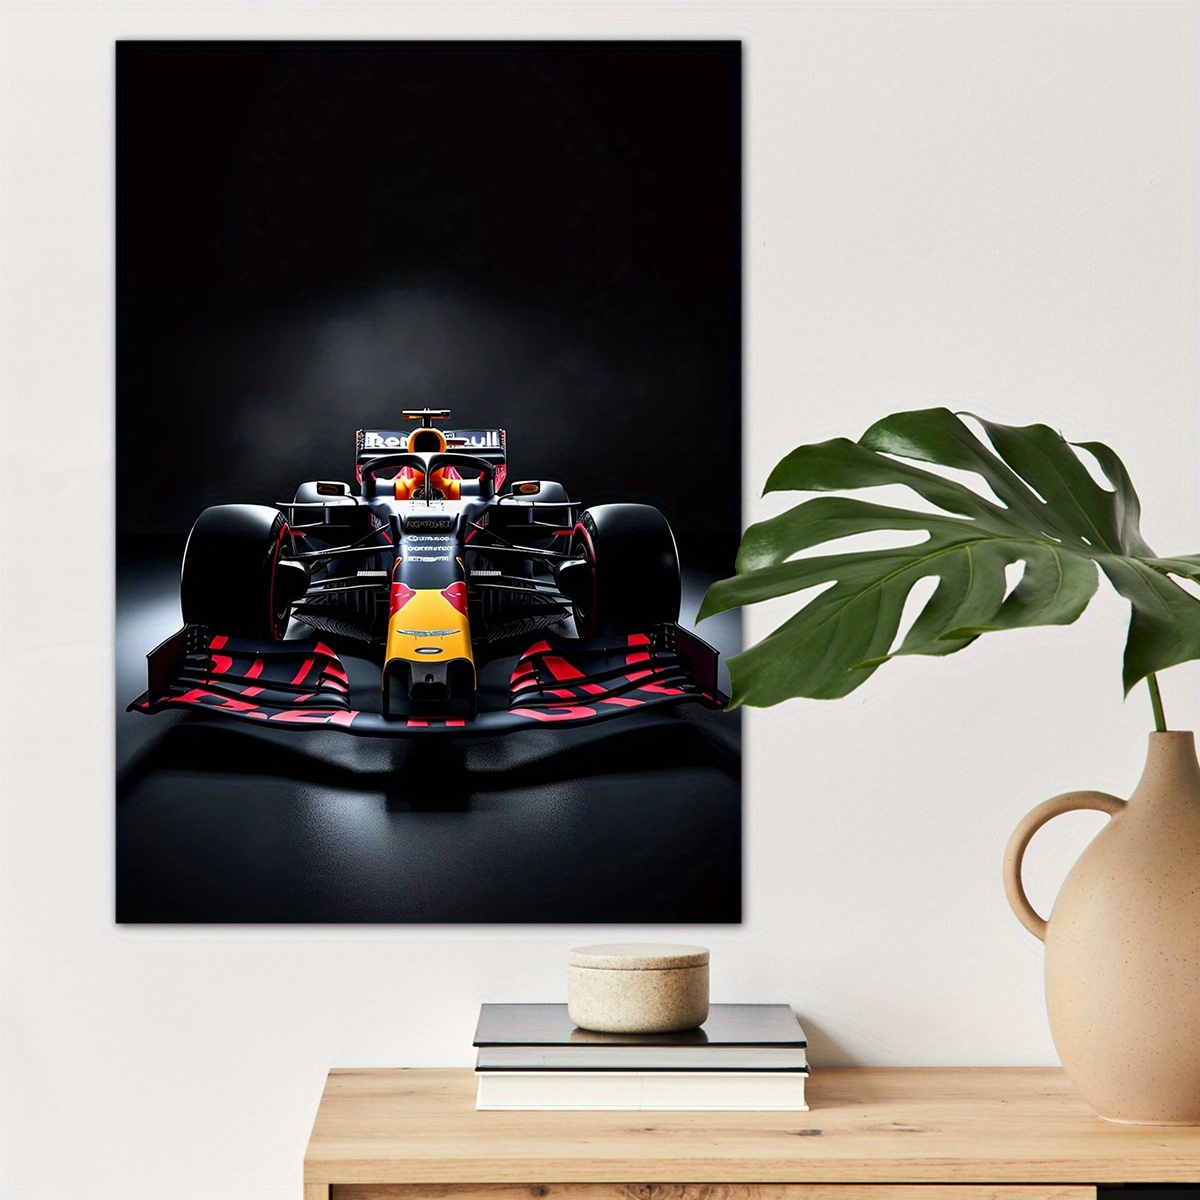 

1pc Supercar Canvas Wall Art For Home Decor, High Quality And Fans Wall Decor, Car Lovers Canvas Prints For Living Room Bedroom Bathroom Kitchen Office Cafe Decor, Perfect Gift And Decoration